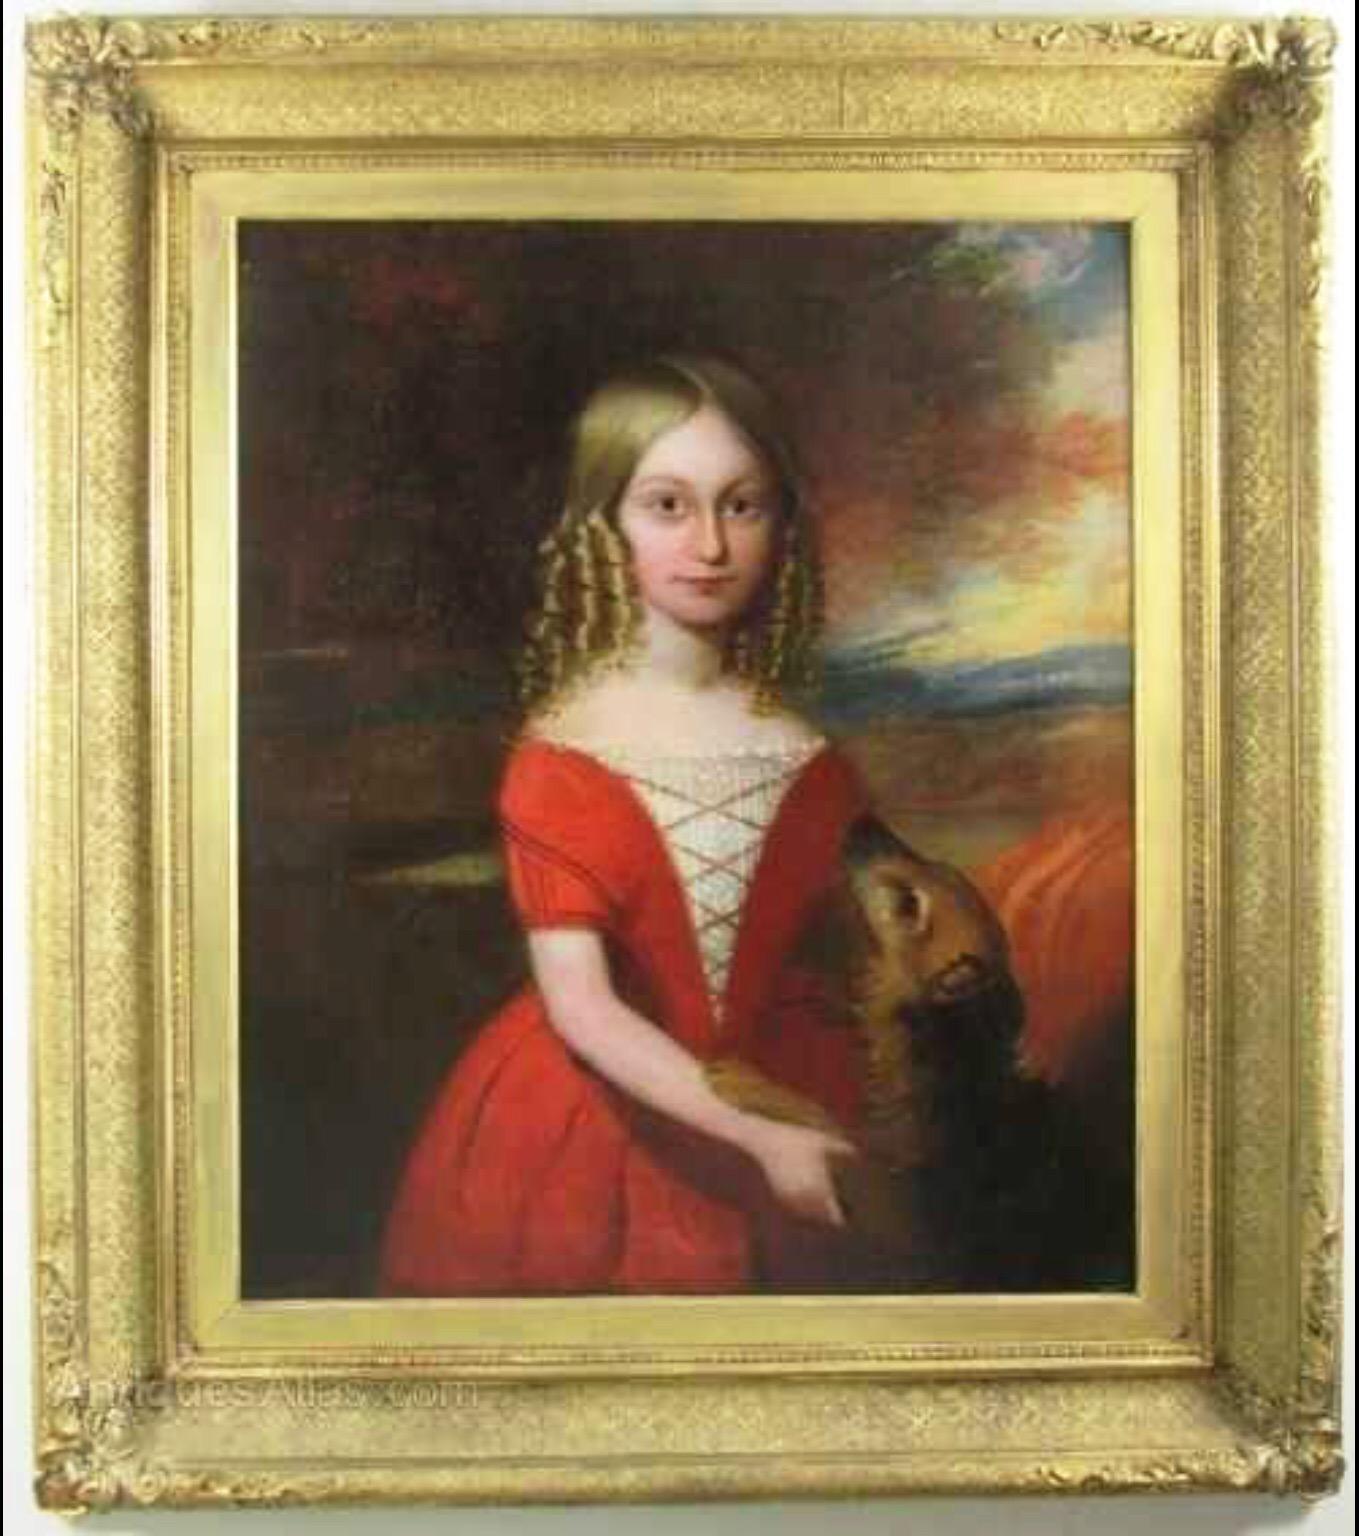 Unknown Portrait Painting - 18thc Oil Portrait Of Young Girl & Her Pet Dog English School Painting